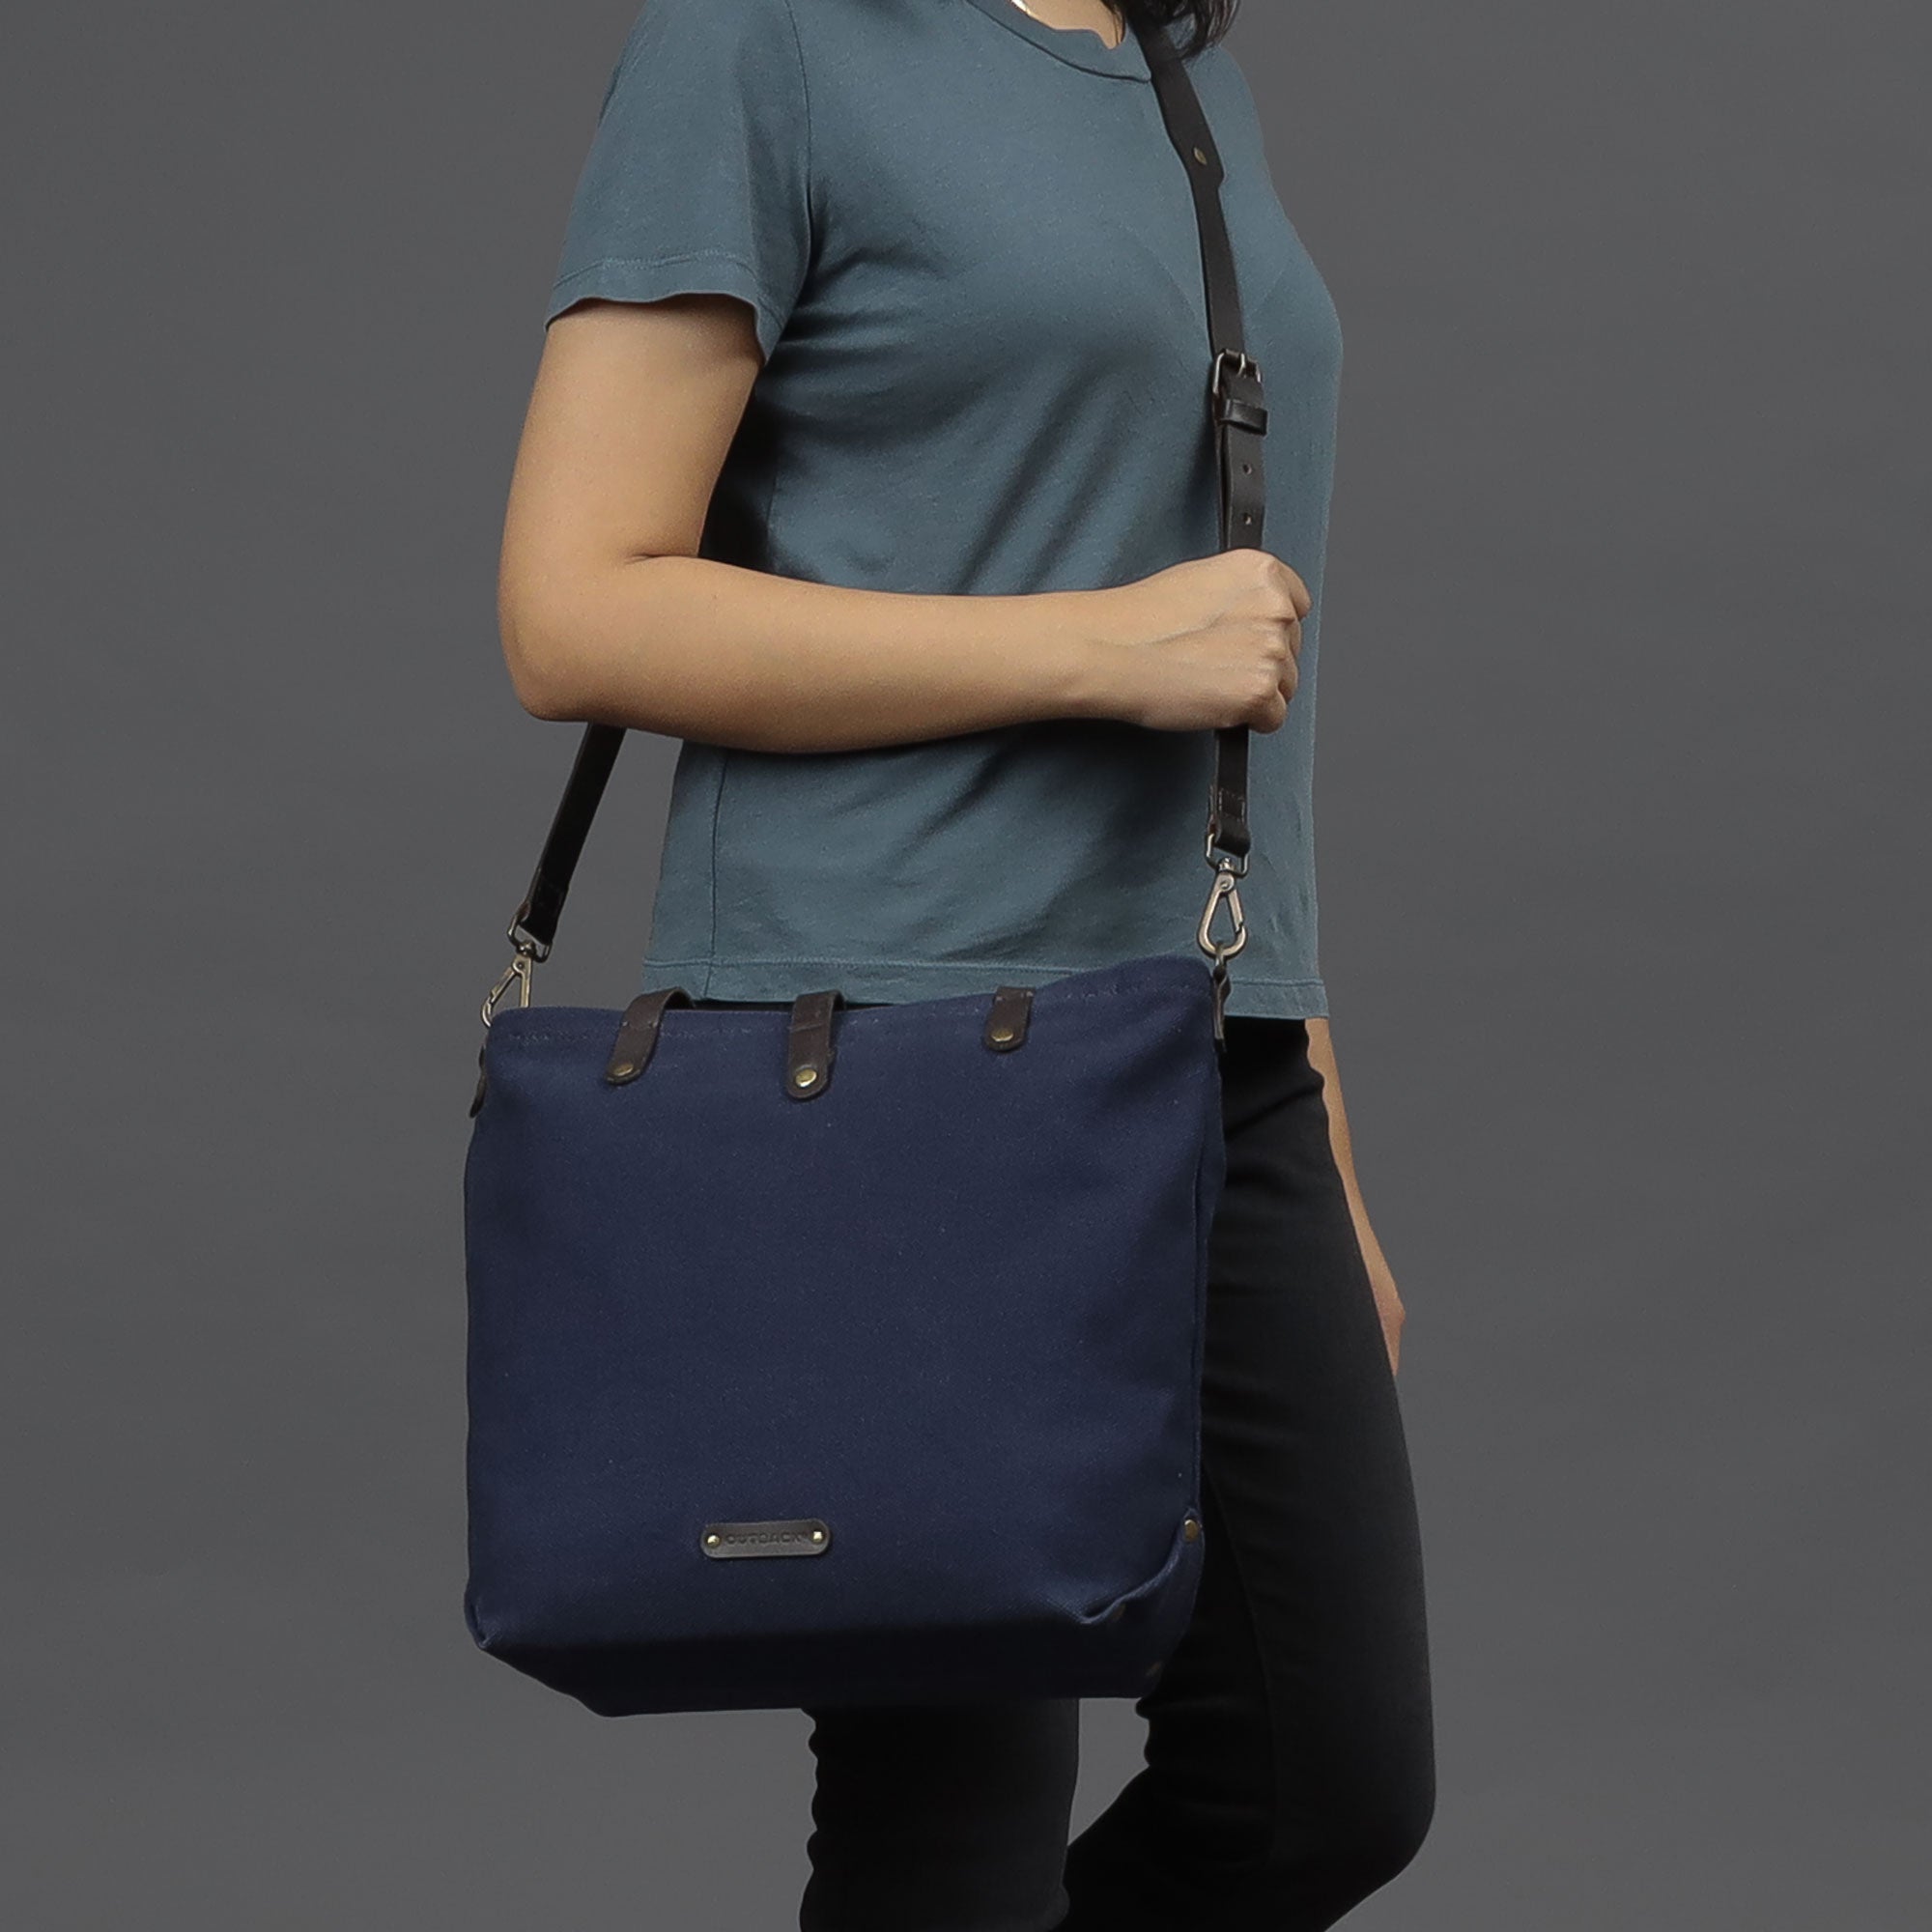 Navy canvas tote for college girls